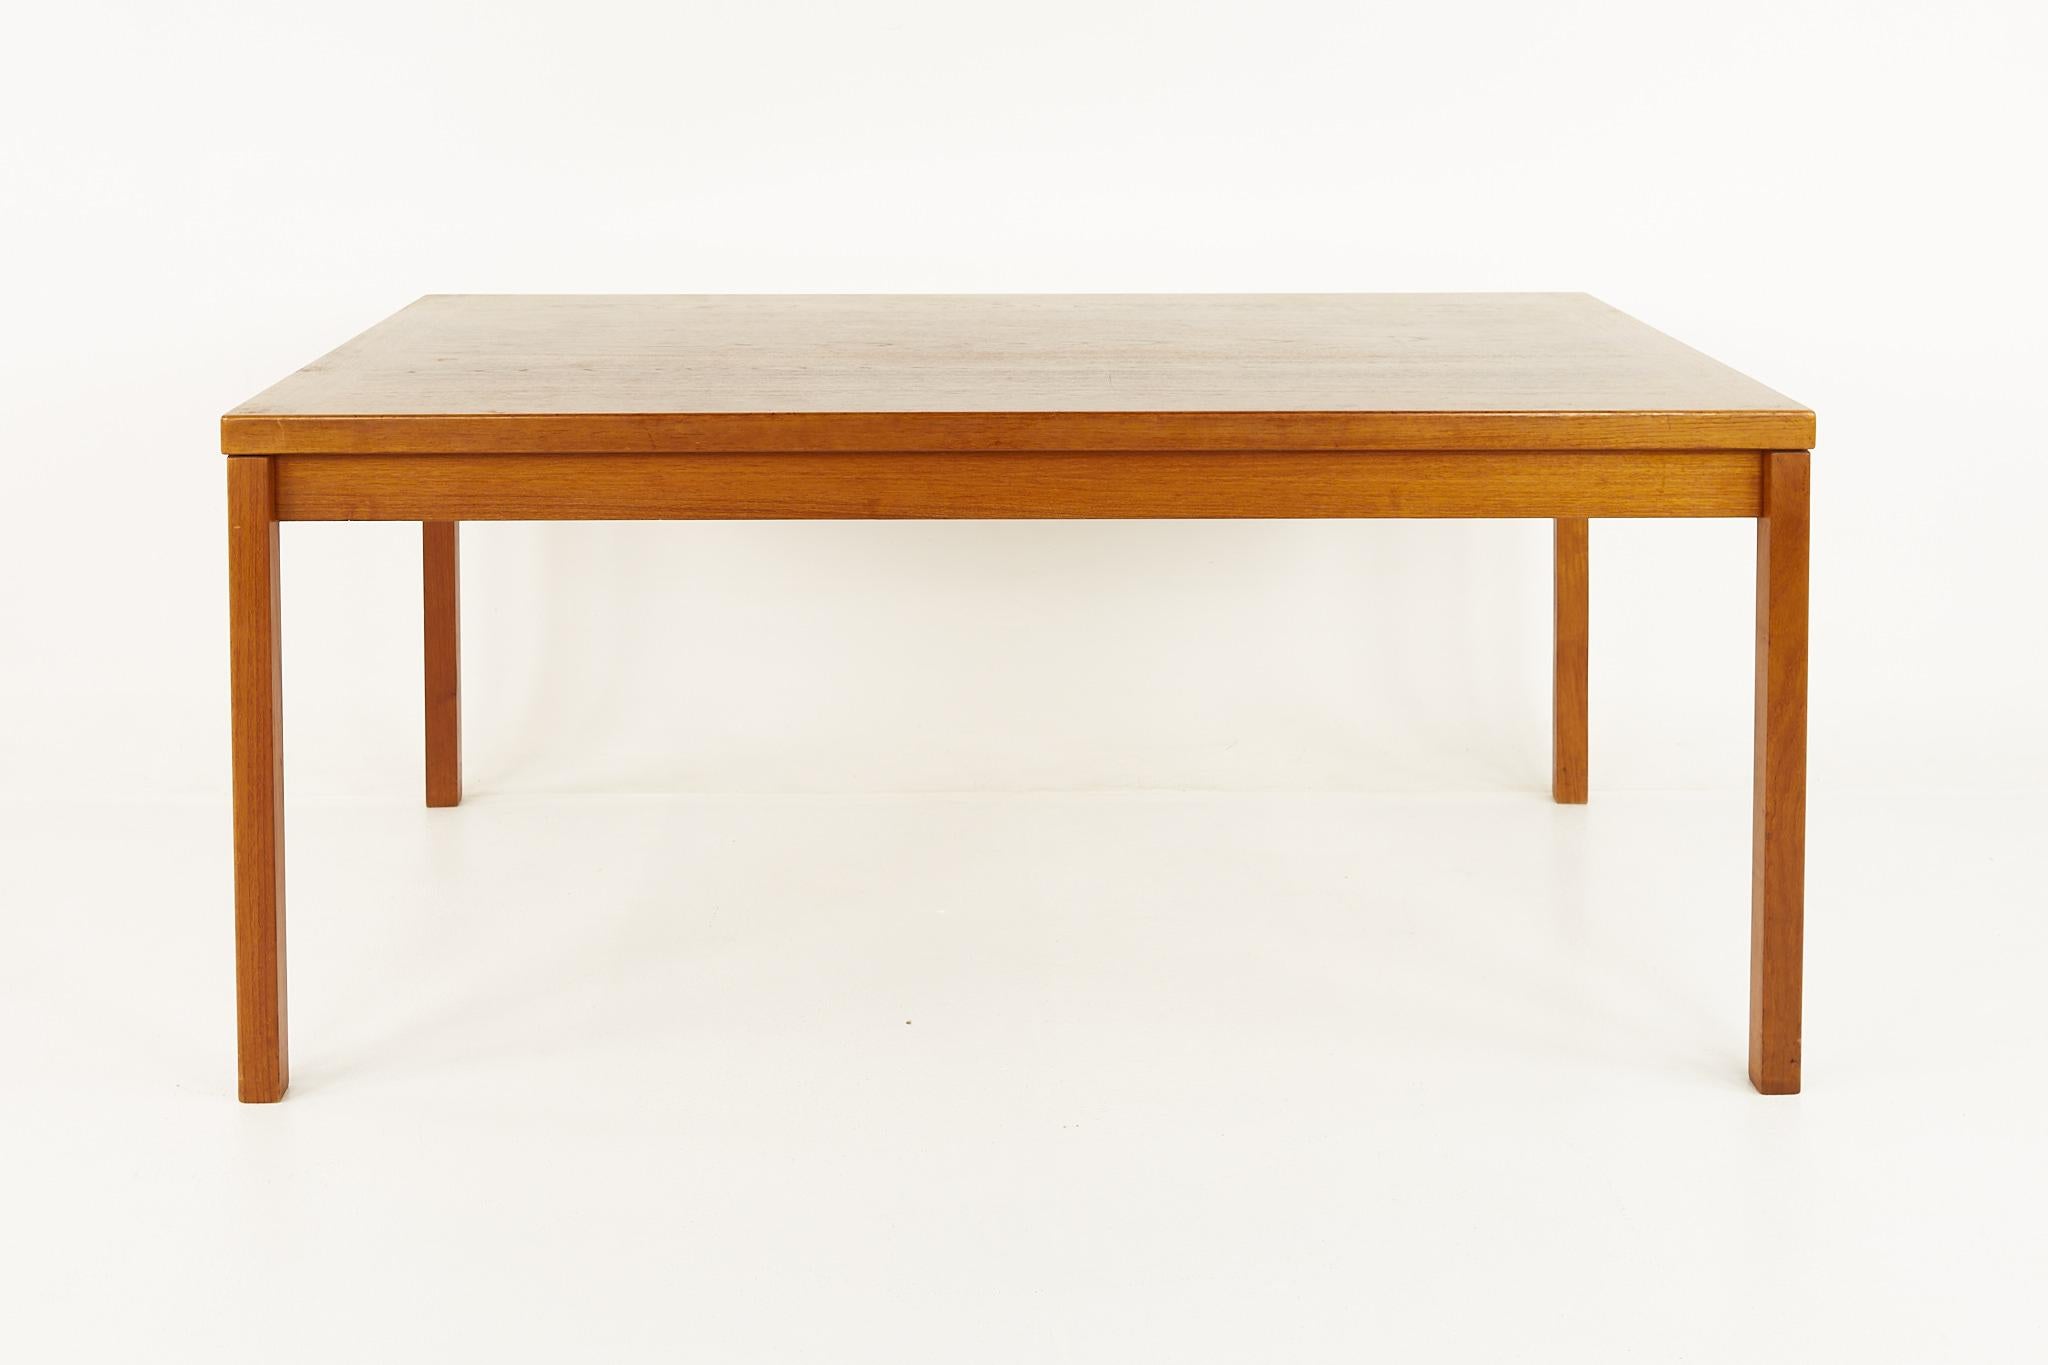 Ansager Mobler mid century teak hidden leaf dining table

This table measures: 65 wide x 39.25 deep x 28.5 inches high, each of the 2 leaves are 38.5 wide, making a maximum table width of 142 inches

All pieces of furniture can be had in what we